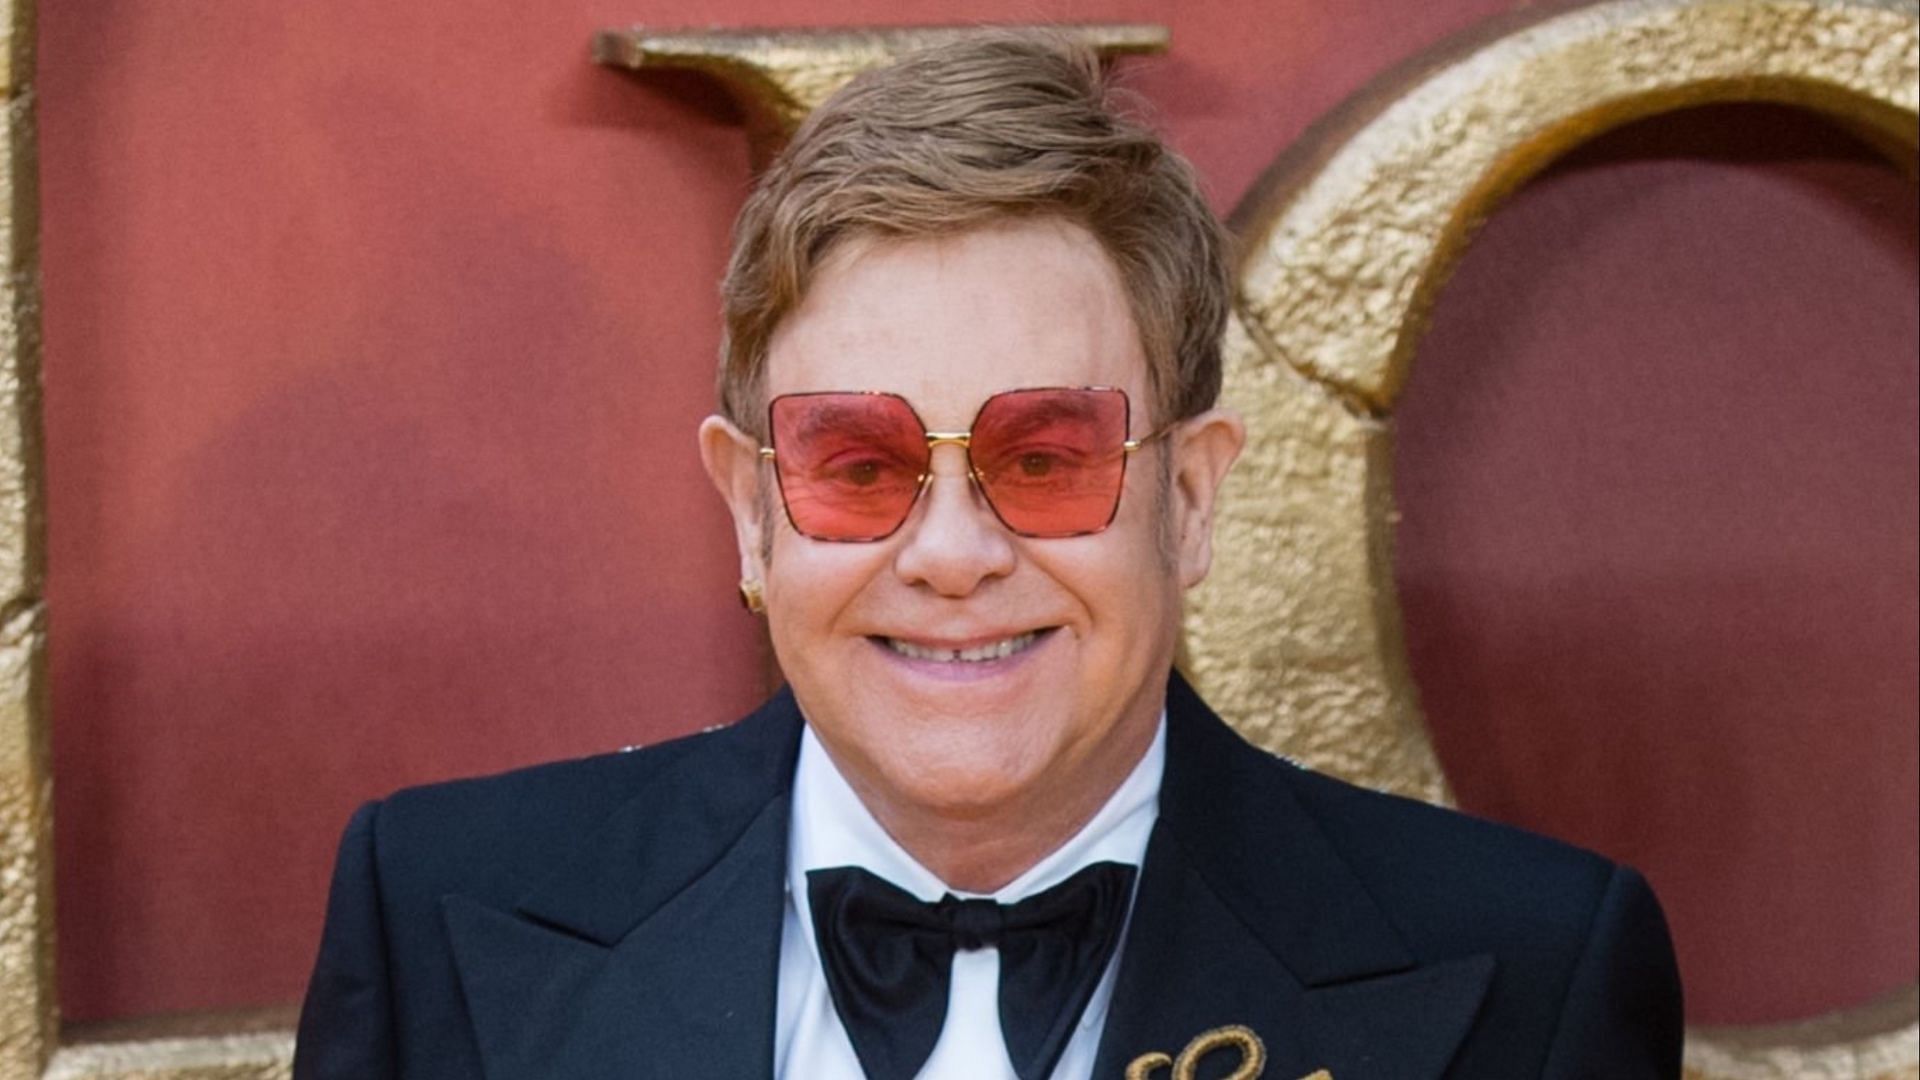 Elton John spent one night at a hospital after falling in his villa. (Image via David M. Benett/Getty Images)